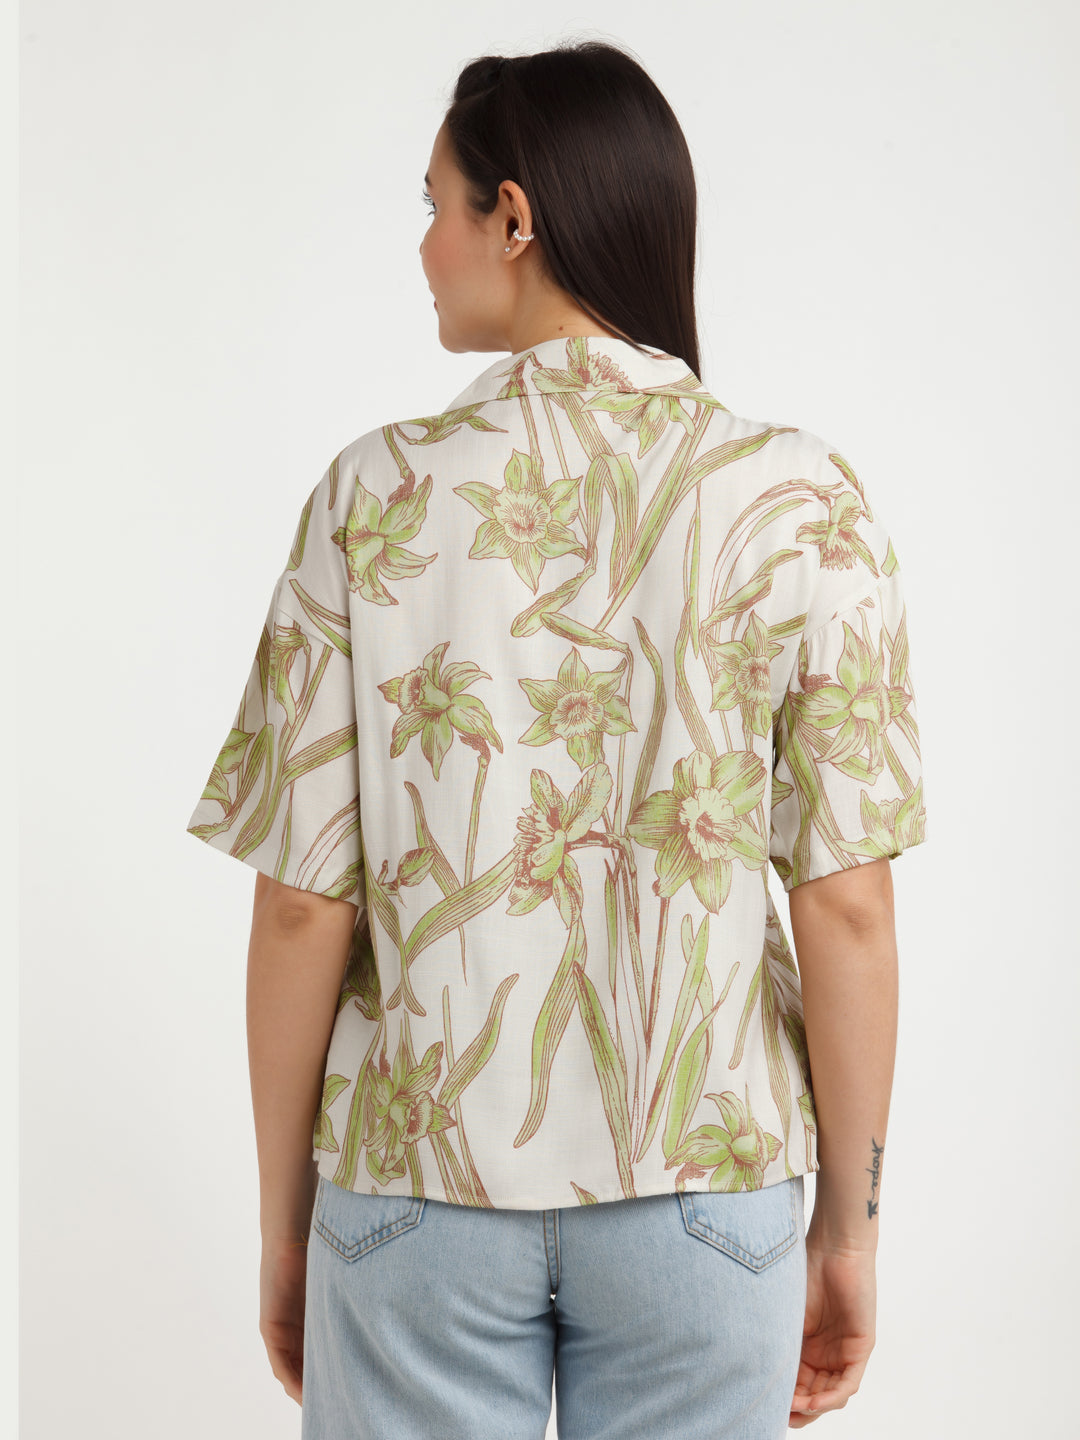 Off White Printed Shirt For Women